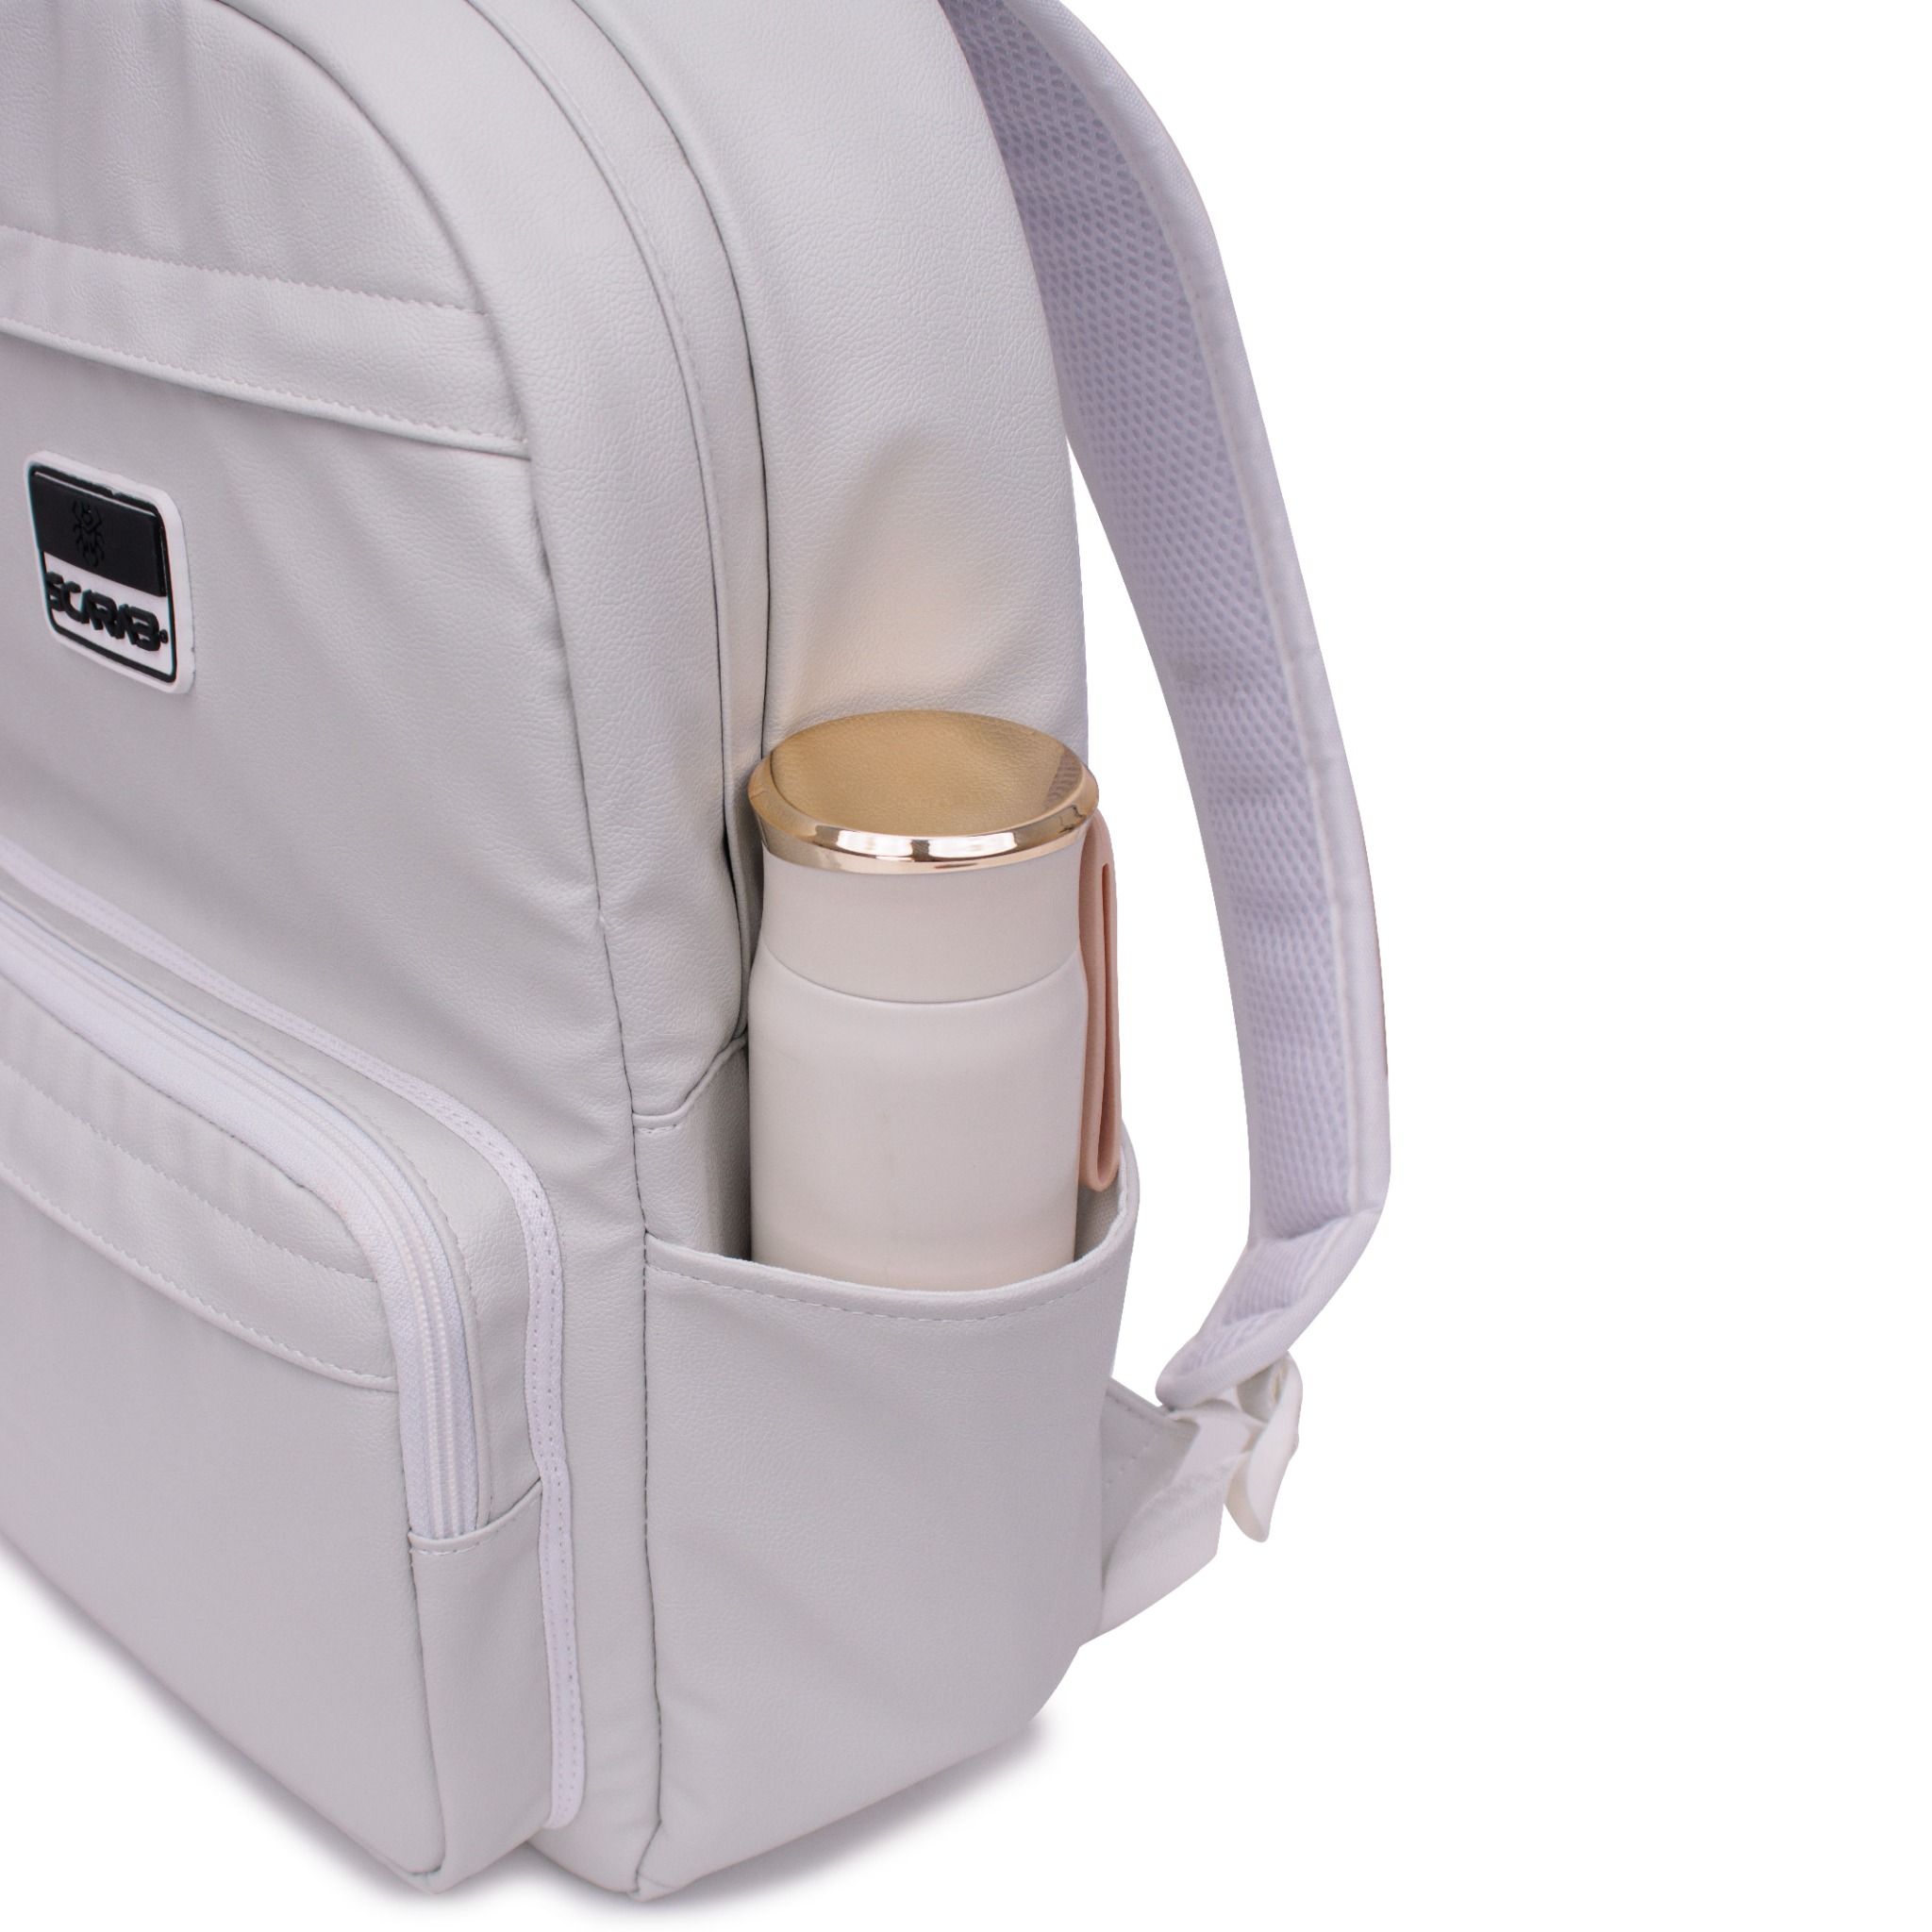  Multi Leather Backpack - Grey 